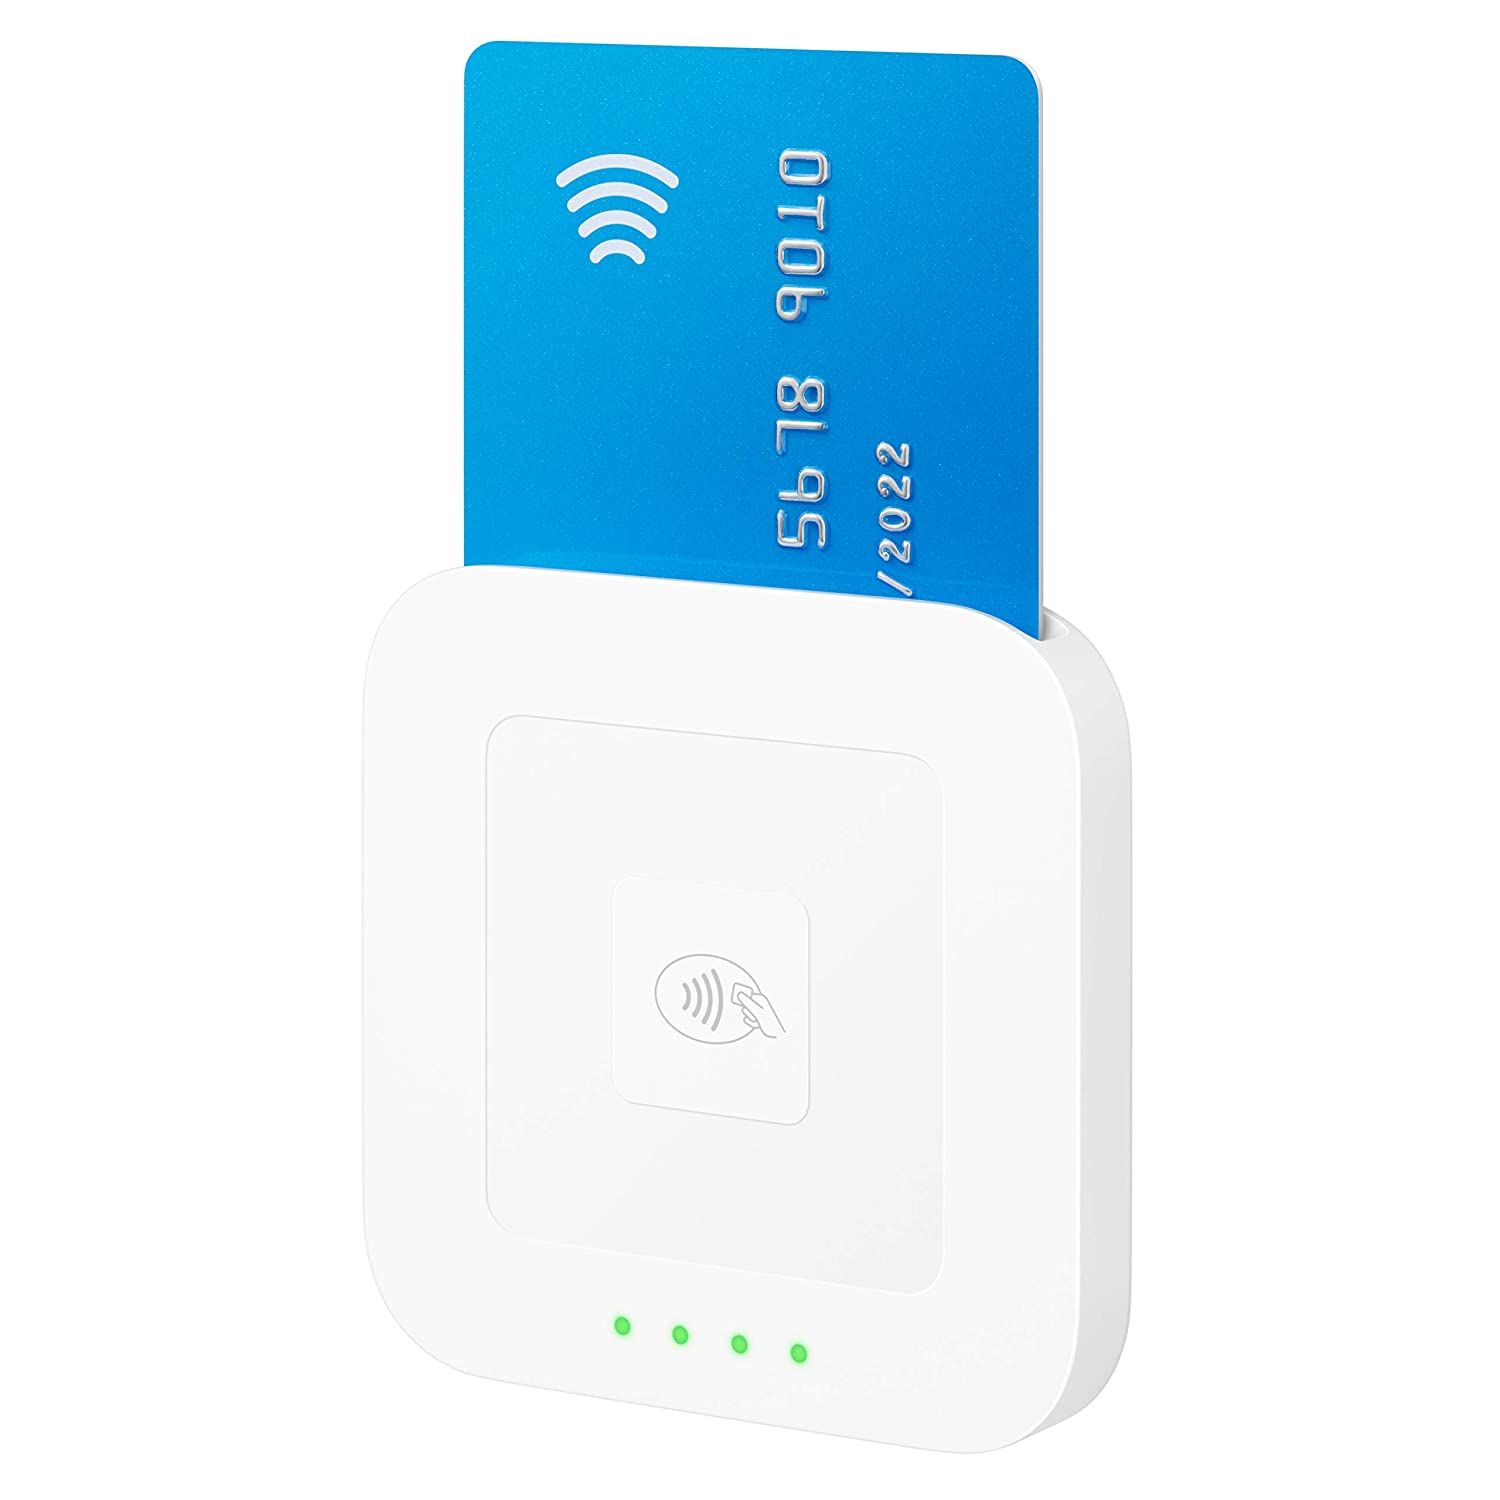 cashless payments with Square